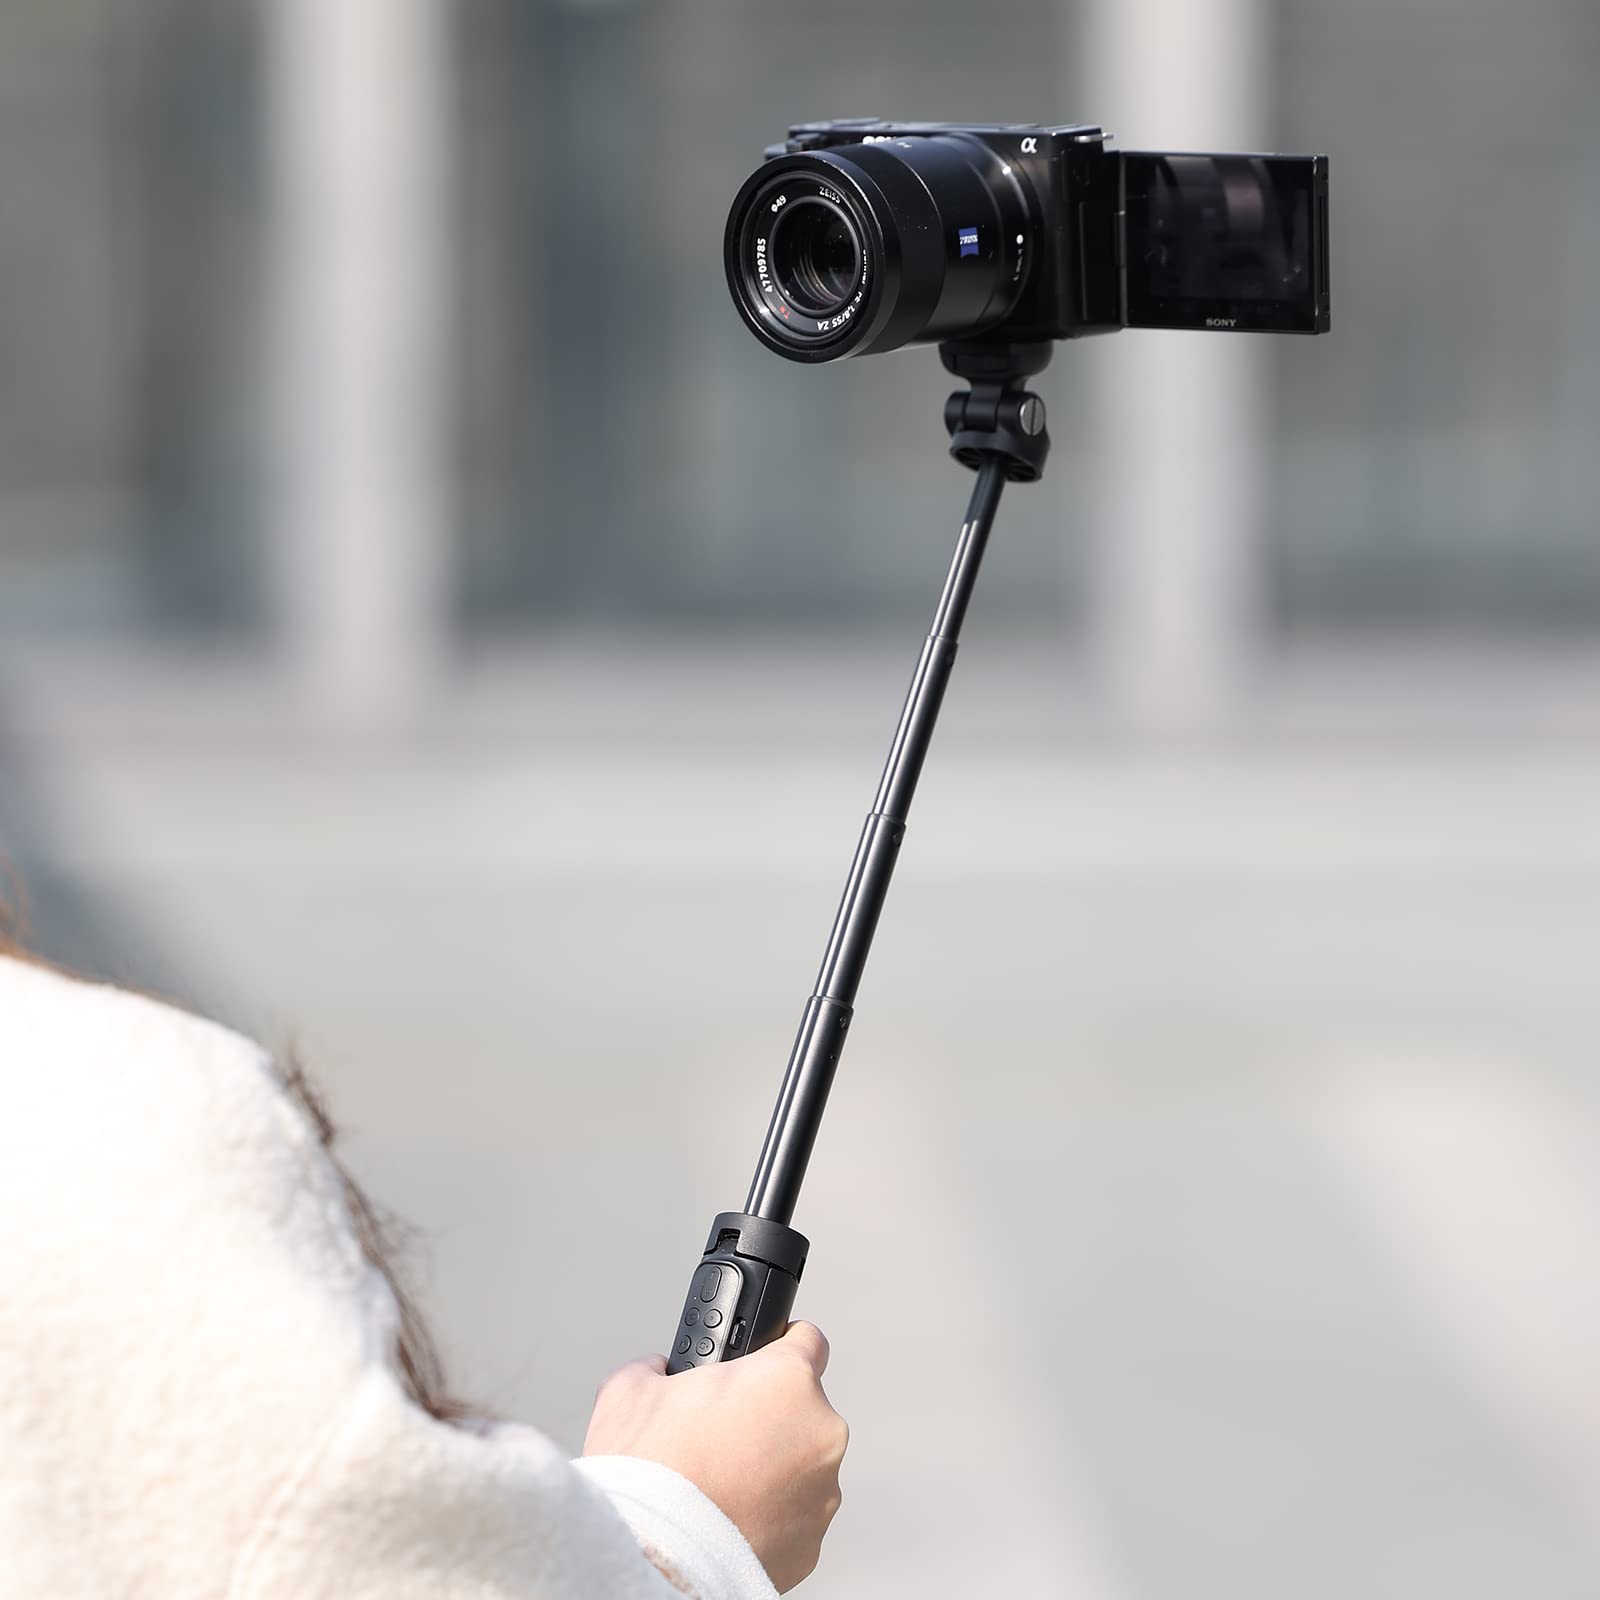 ULANZI RMT-01 Wireless Shooting Grip and Tripod for Sony, Canon, Nikon, and Other Vlog Cameras or Smartphones, Selfie Video Recording Vlogging Accessories for Content Creators and Vloggers